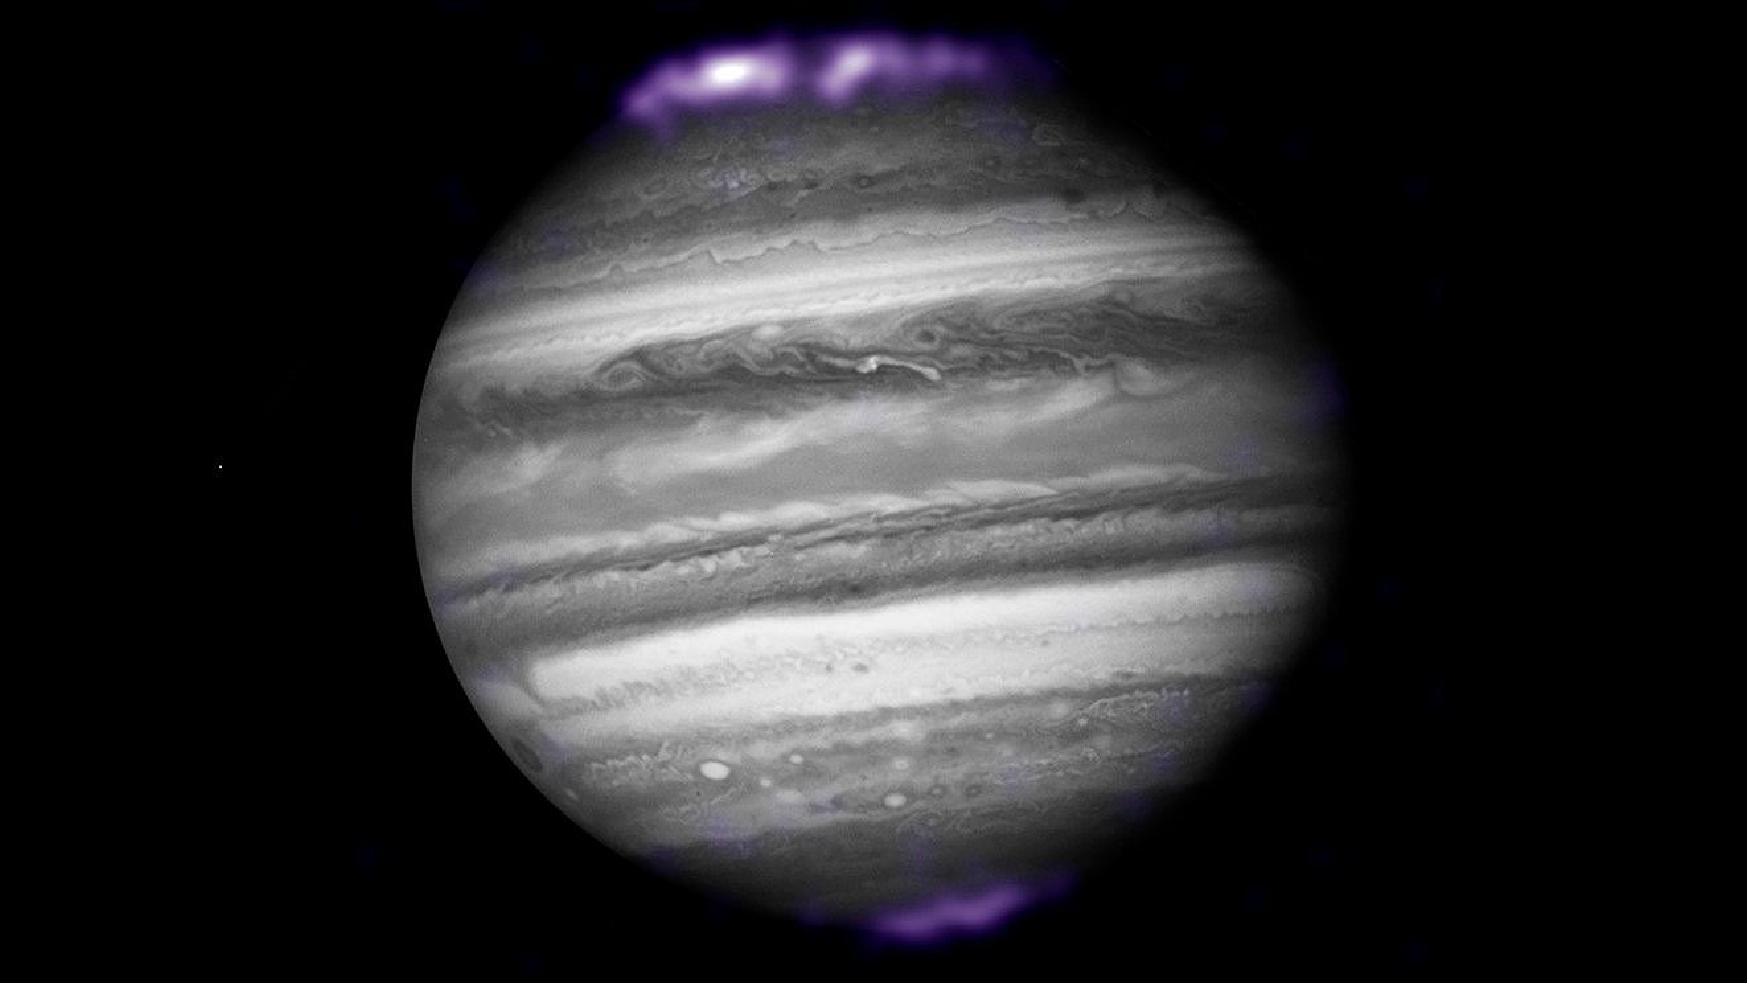 Figure 23: The purple hues in this image show X-ray emissions from Jupiter’s auroras, detected by NASA’s Chandra Space Telescope in 2007. They are overlaid on an image of Jupiter taken by NASA’s Hubble Space Telescope. Jupiter is the only gas giant planet where scientists have detected X-ray auroras [image credits: (X-ray) NASA/CXC/SwRI/R. Gladstone et al.; (Optical) NASA/ESA/Hubble Heritage (AURA/STScI)]